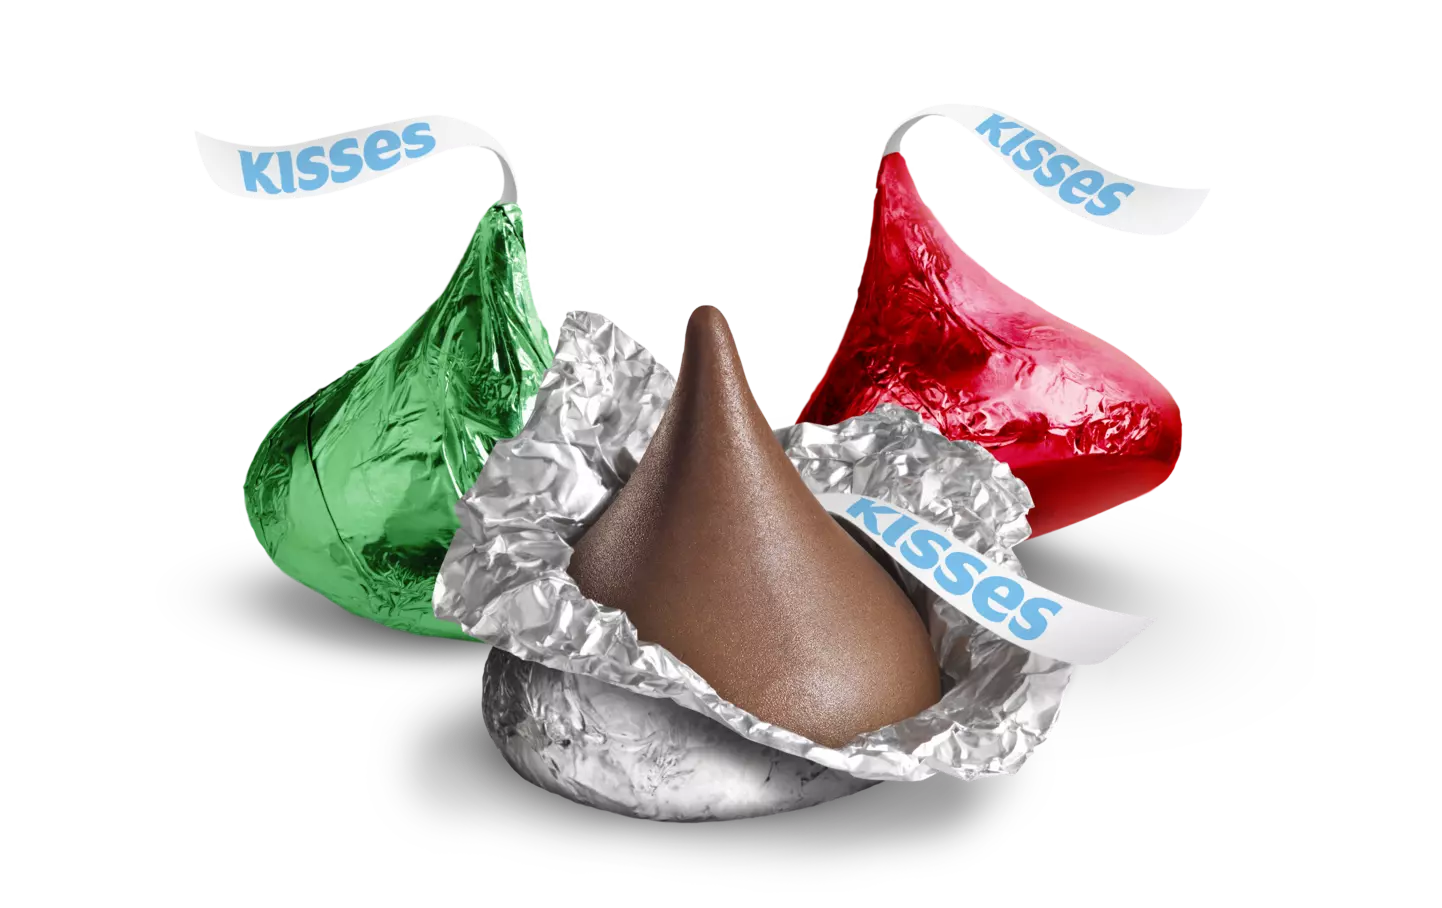 HERSHEY'S KISSES Holiday Milk Chocolate Candy, 34.1 oz bag - Out of Package